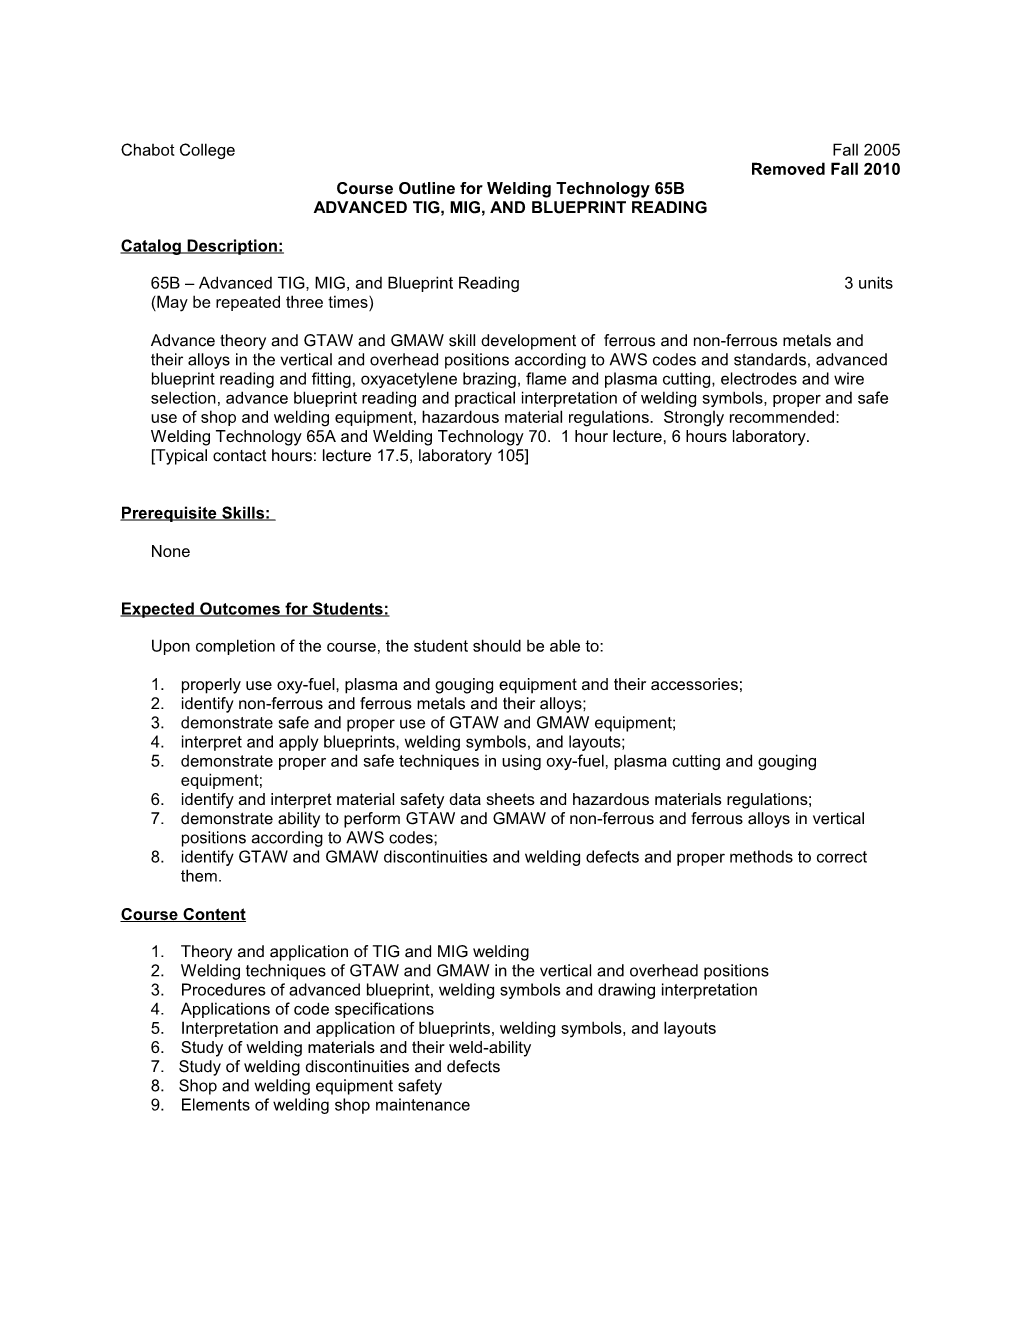 Course Outline for Welding Technology 65B